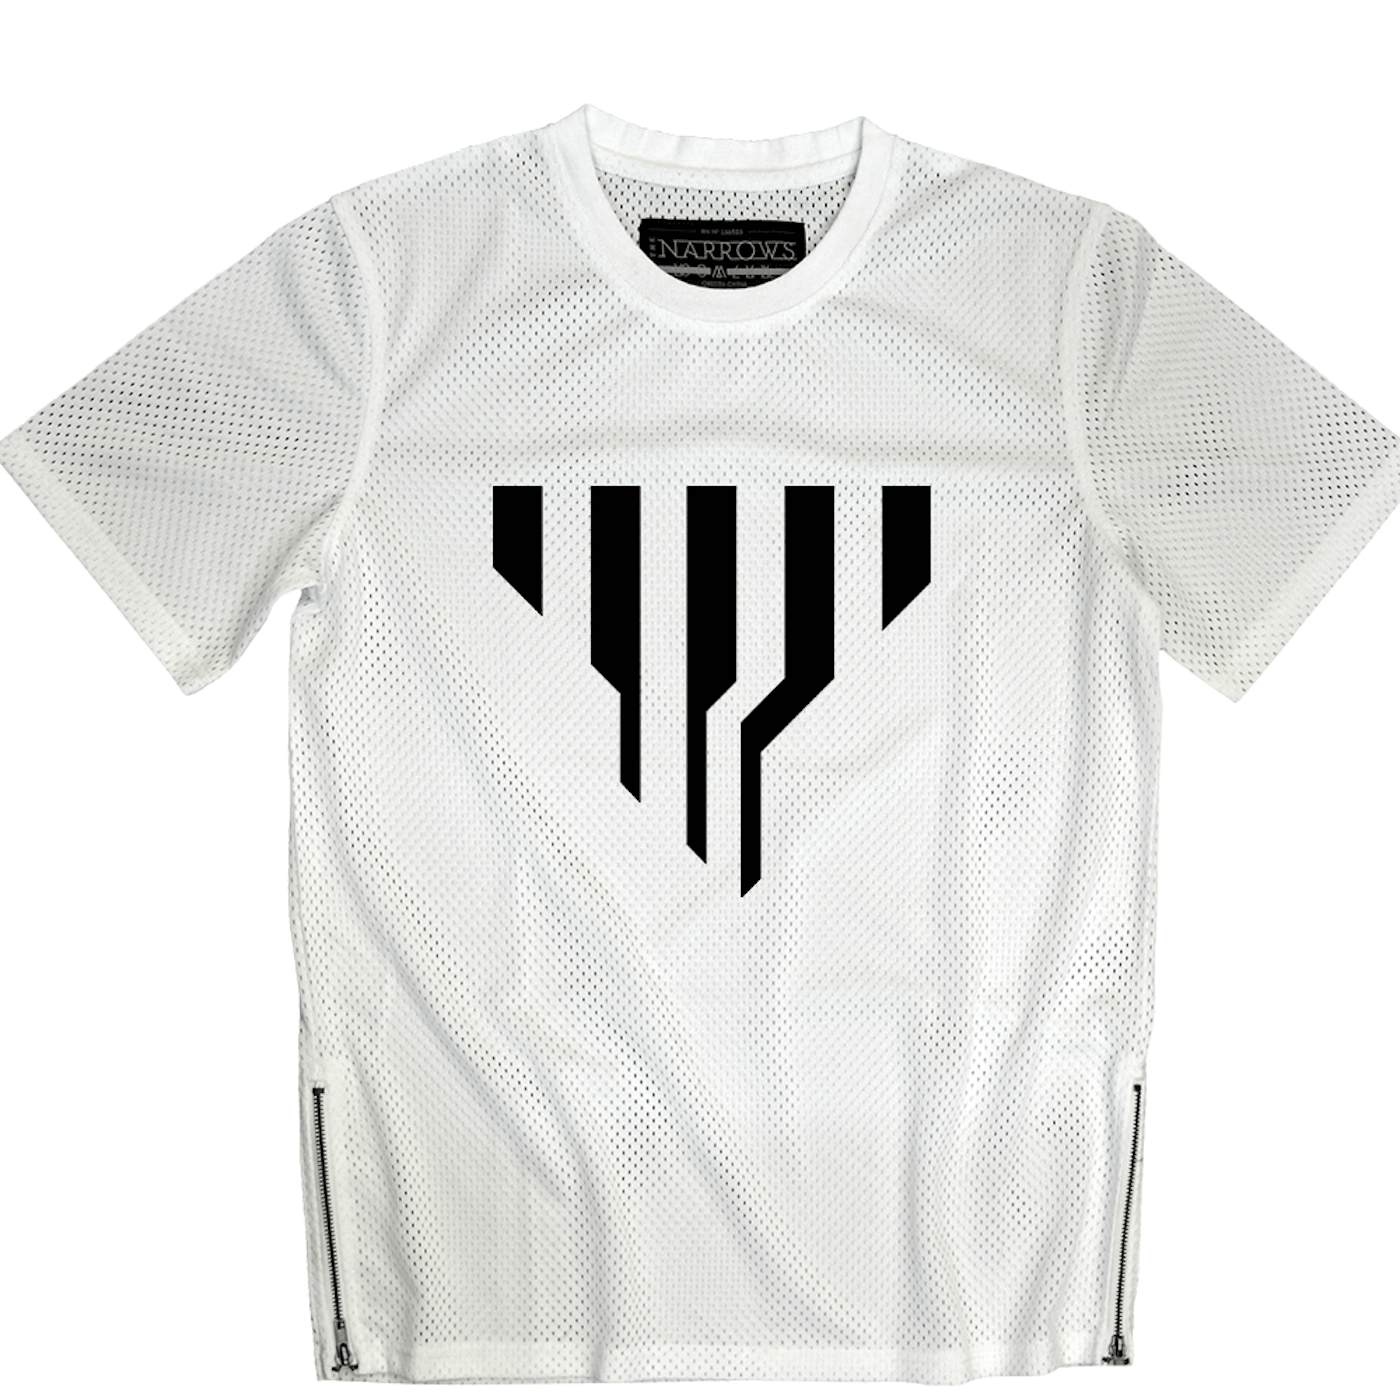 Electric Zoo Festival 2015 Narrows Transformed White Mesh Tee